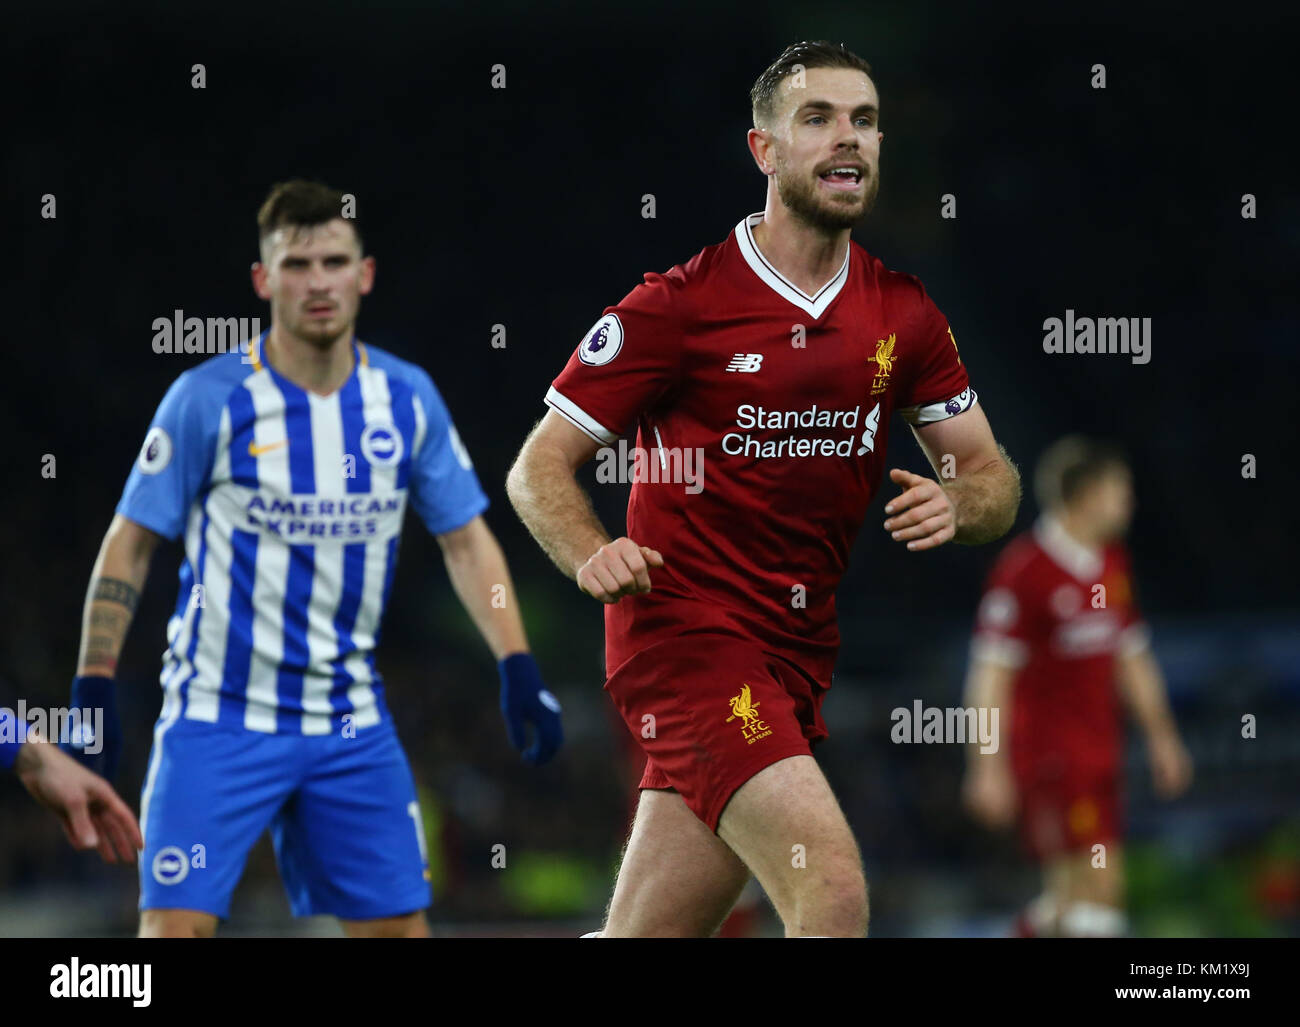 Jordan Henderson of Liverpool during the Premier League match between Brighton and Hove Albion and Liverpool at the American Express Community Stadium in Brighton and Hove. 02 Dec 2017 *** EDITORIAL USE ONLY *** FA Premier League and Football League images are subject to DataCo Licence see www.football-dataco.com Stock Photo